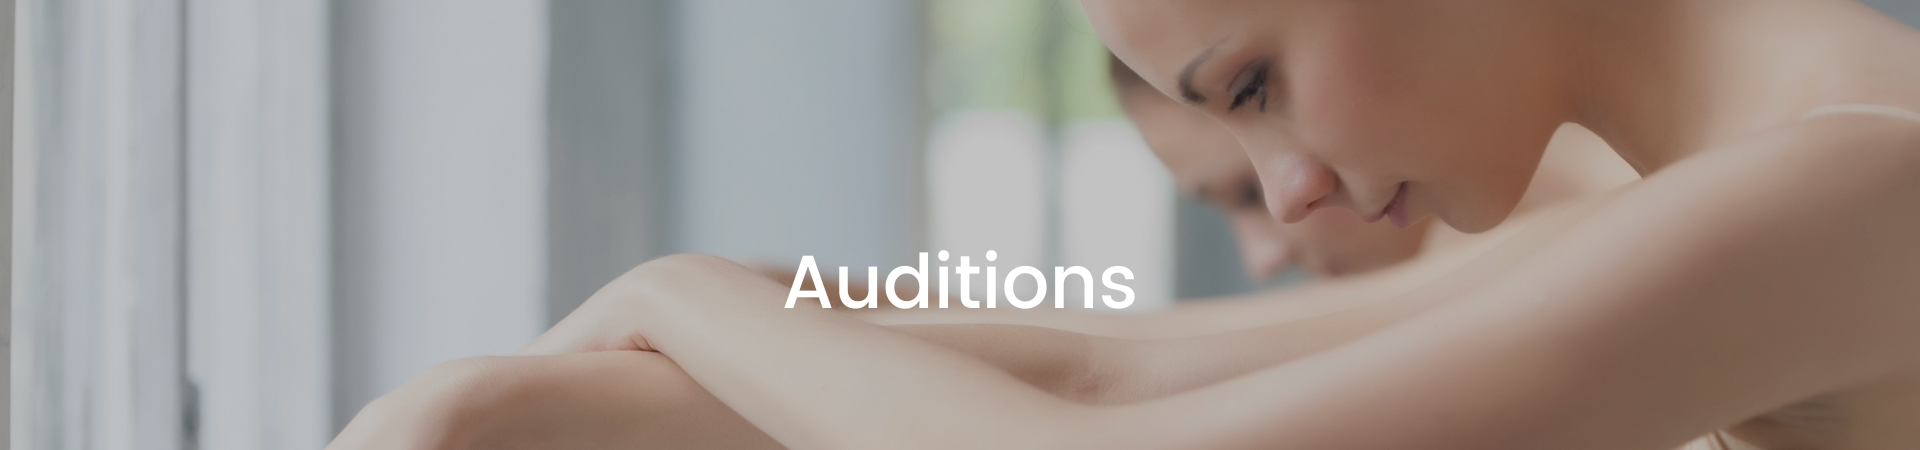 NEW YORK CITY AUDITIONS FOR EXPERIENCED IMPROVISERS PREFERABLY WITH BALLET TRAINING